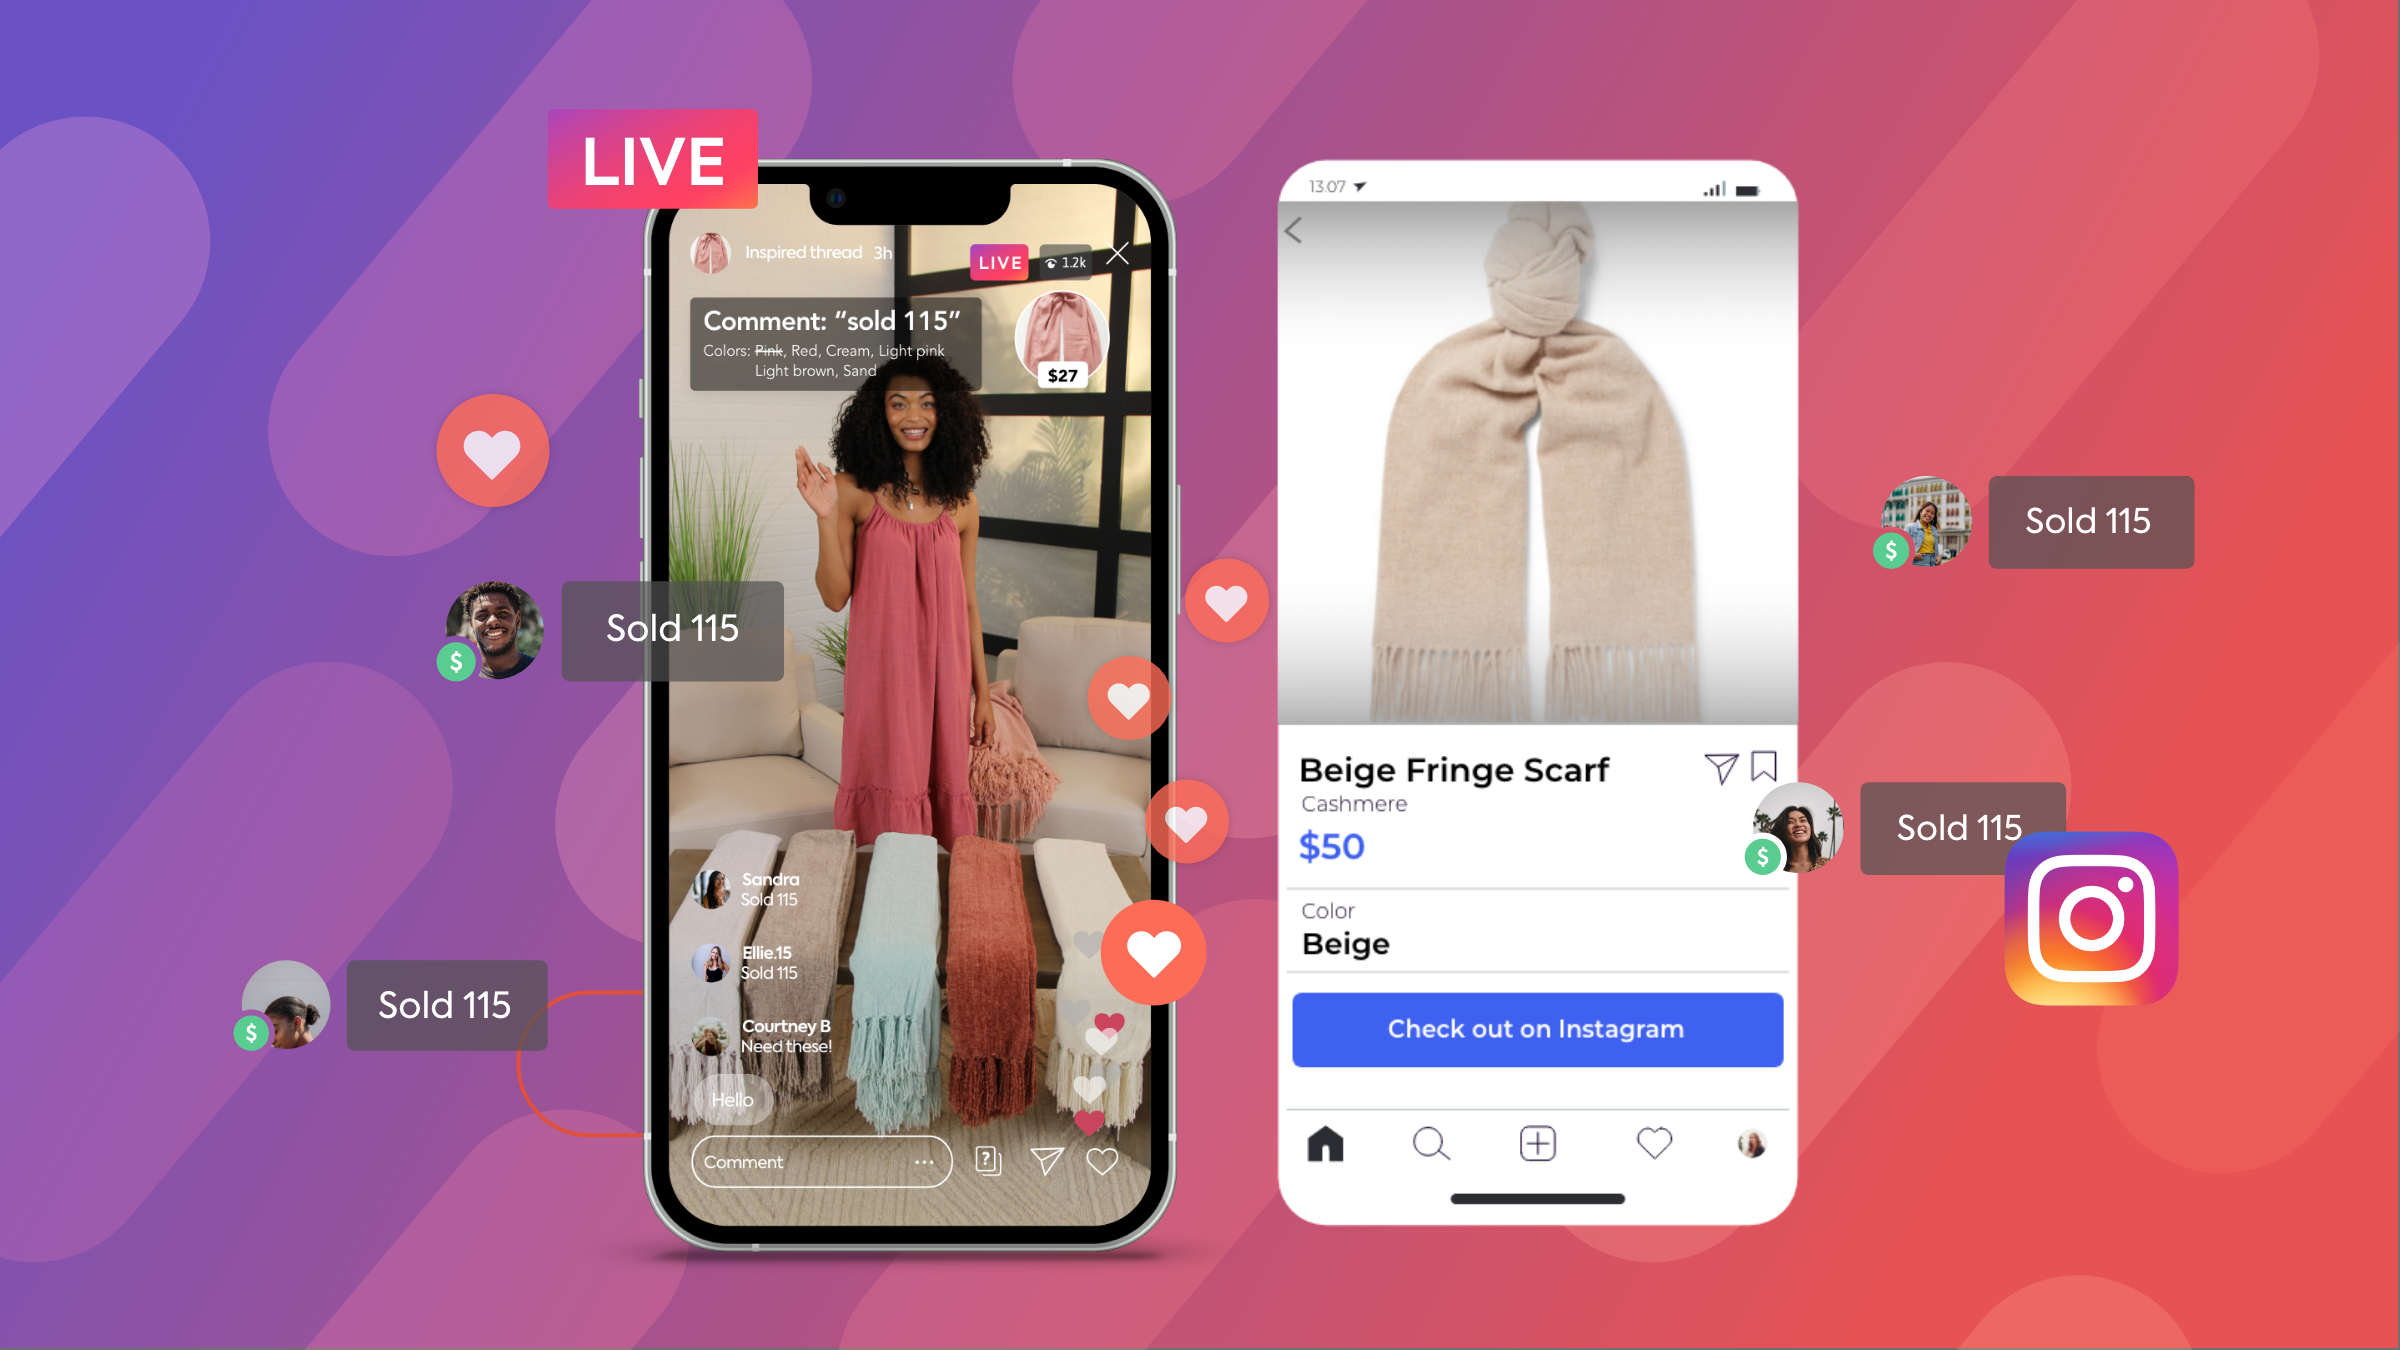 woman selling blankets live on Instagram